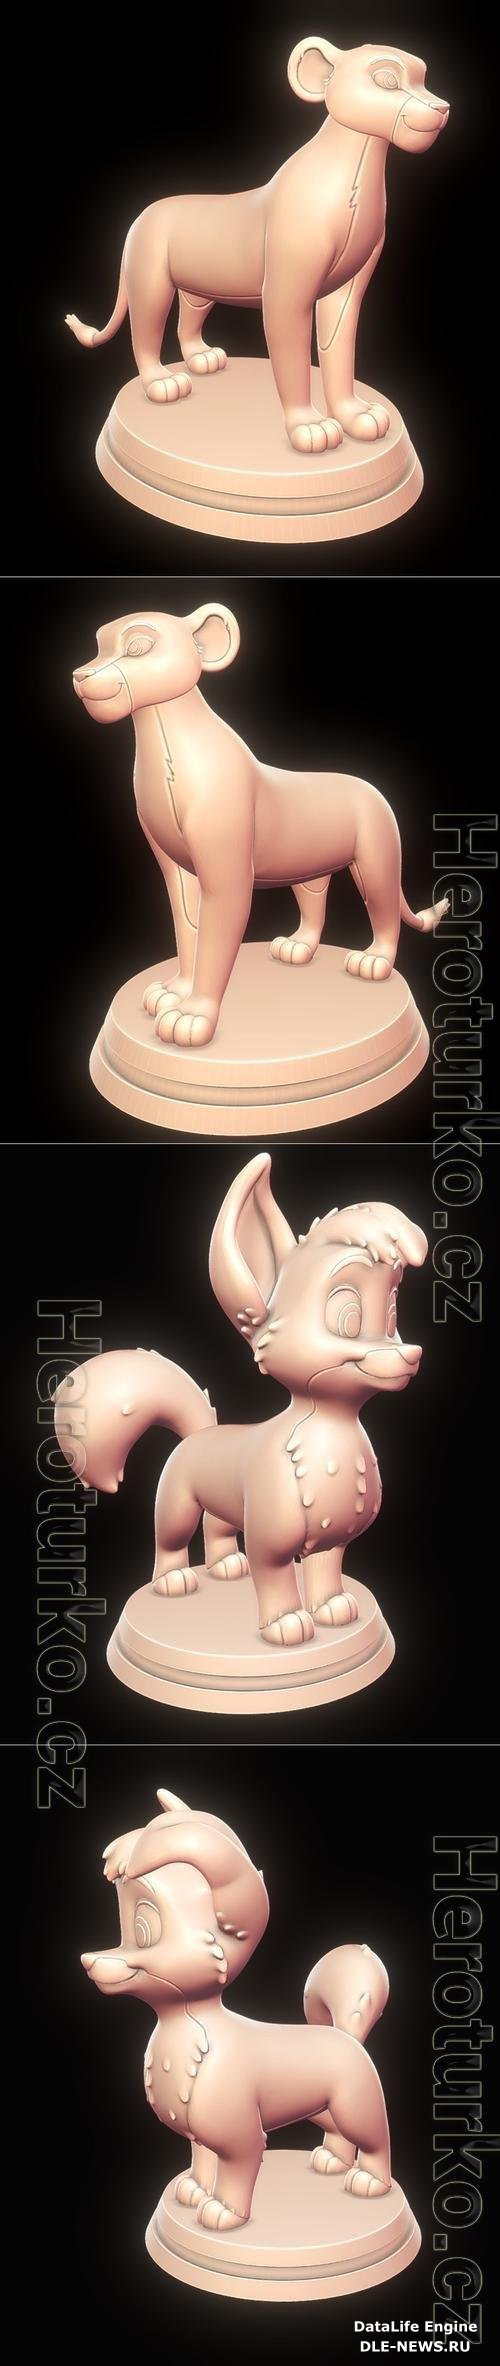 Nala - The Lion King and Angel - Lady and the Tramp 2 3D Print